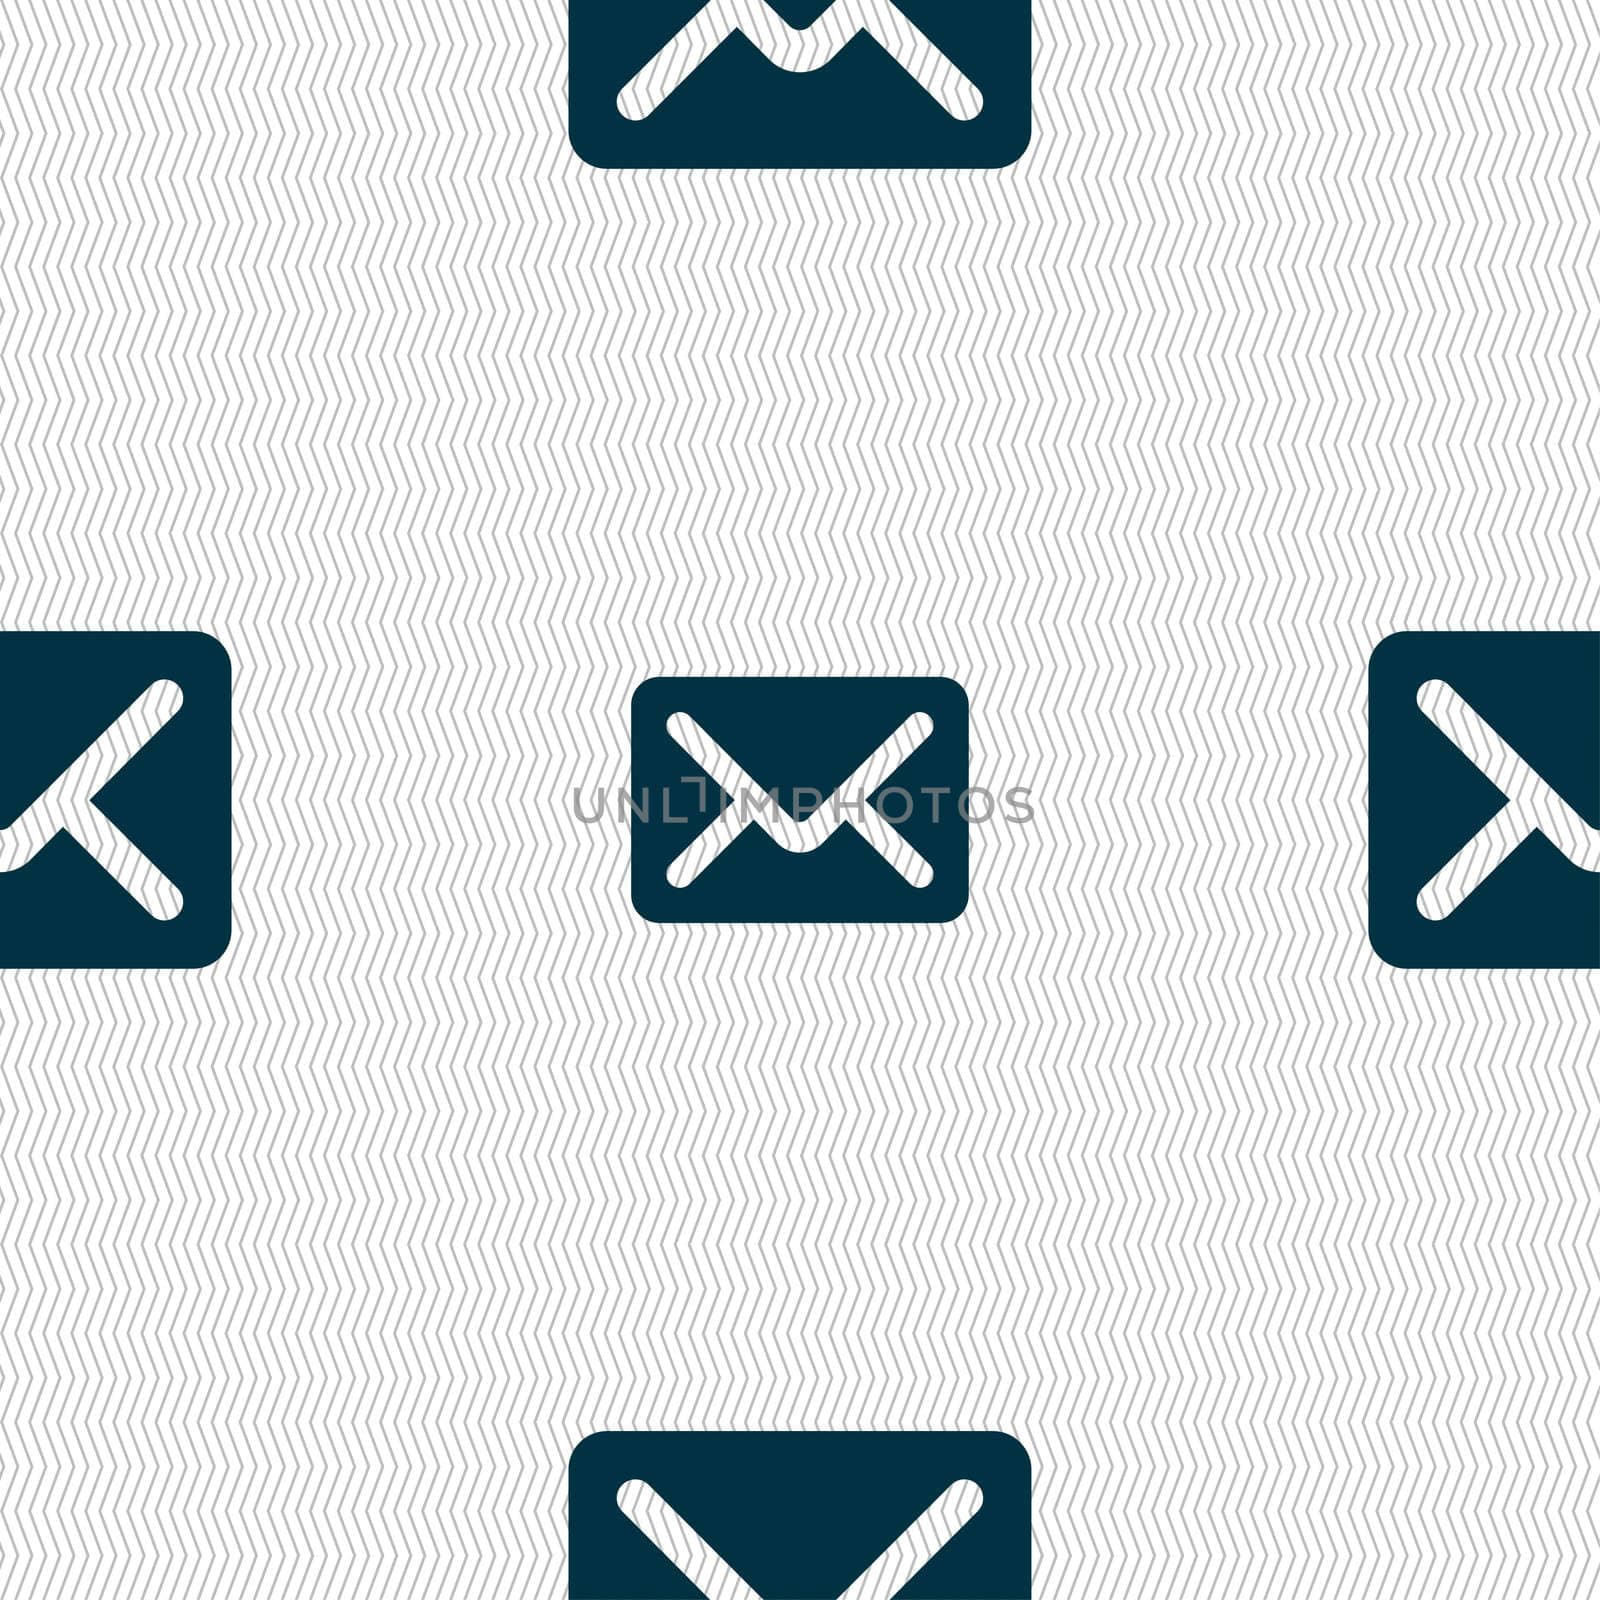 Mail, envelope, letter icon sign. Seamless pattern with geometric texture. illustration